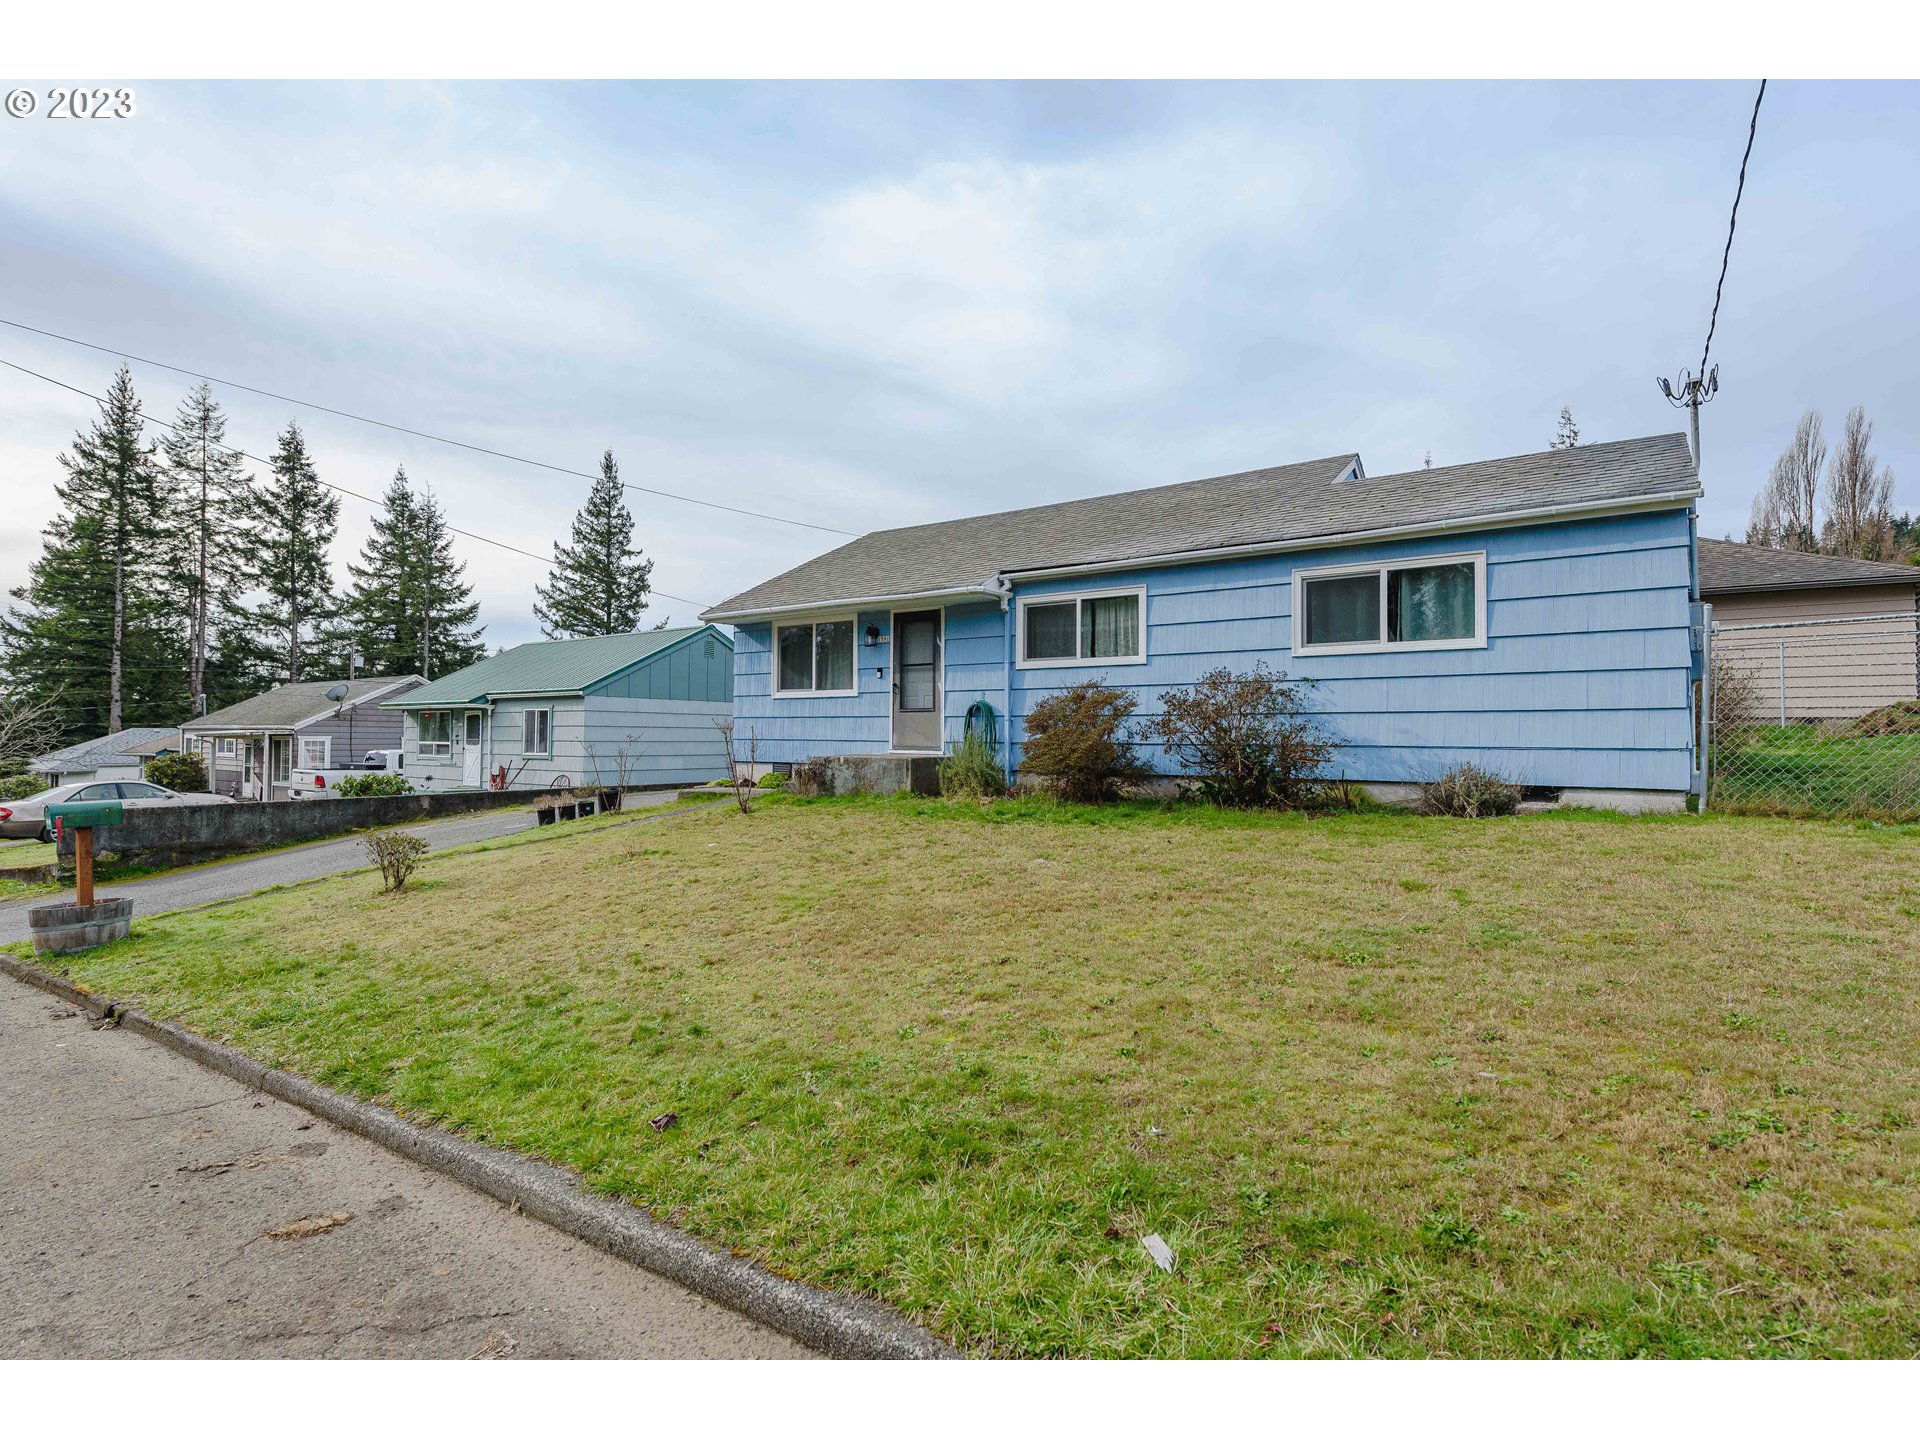 1591 N IVY ST, Coquille, OR 97423